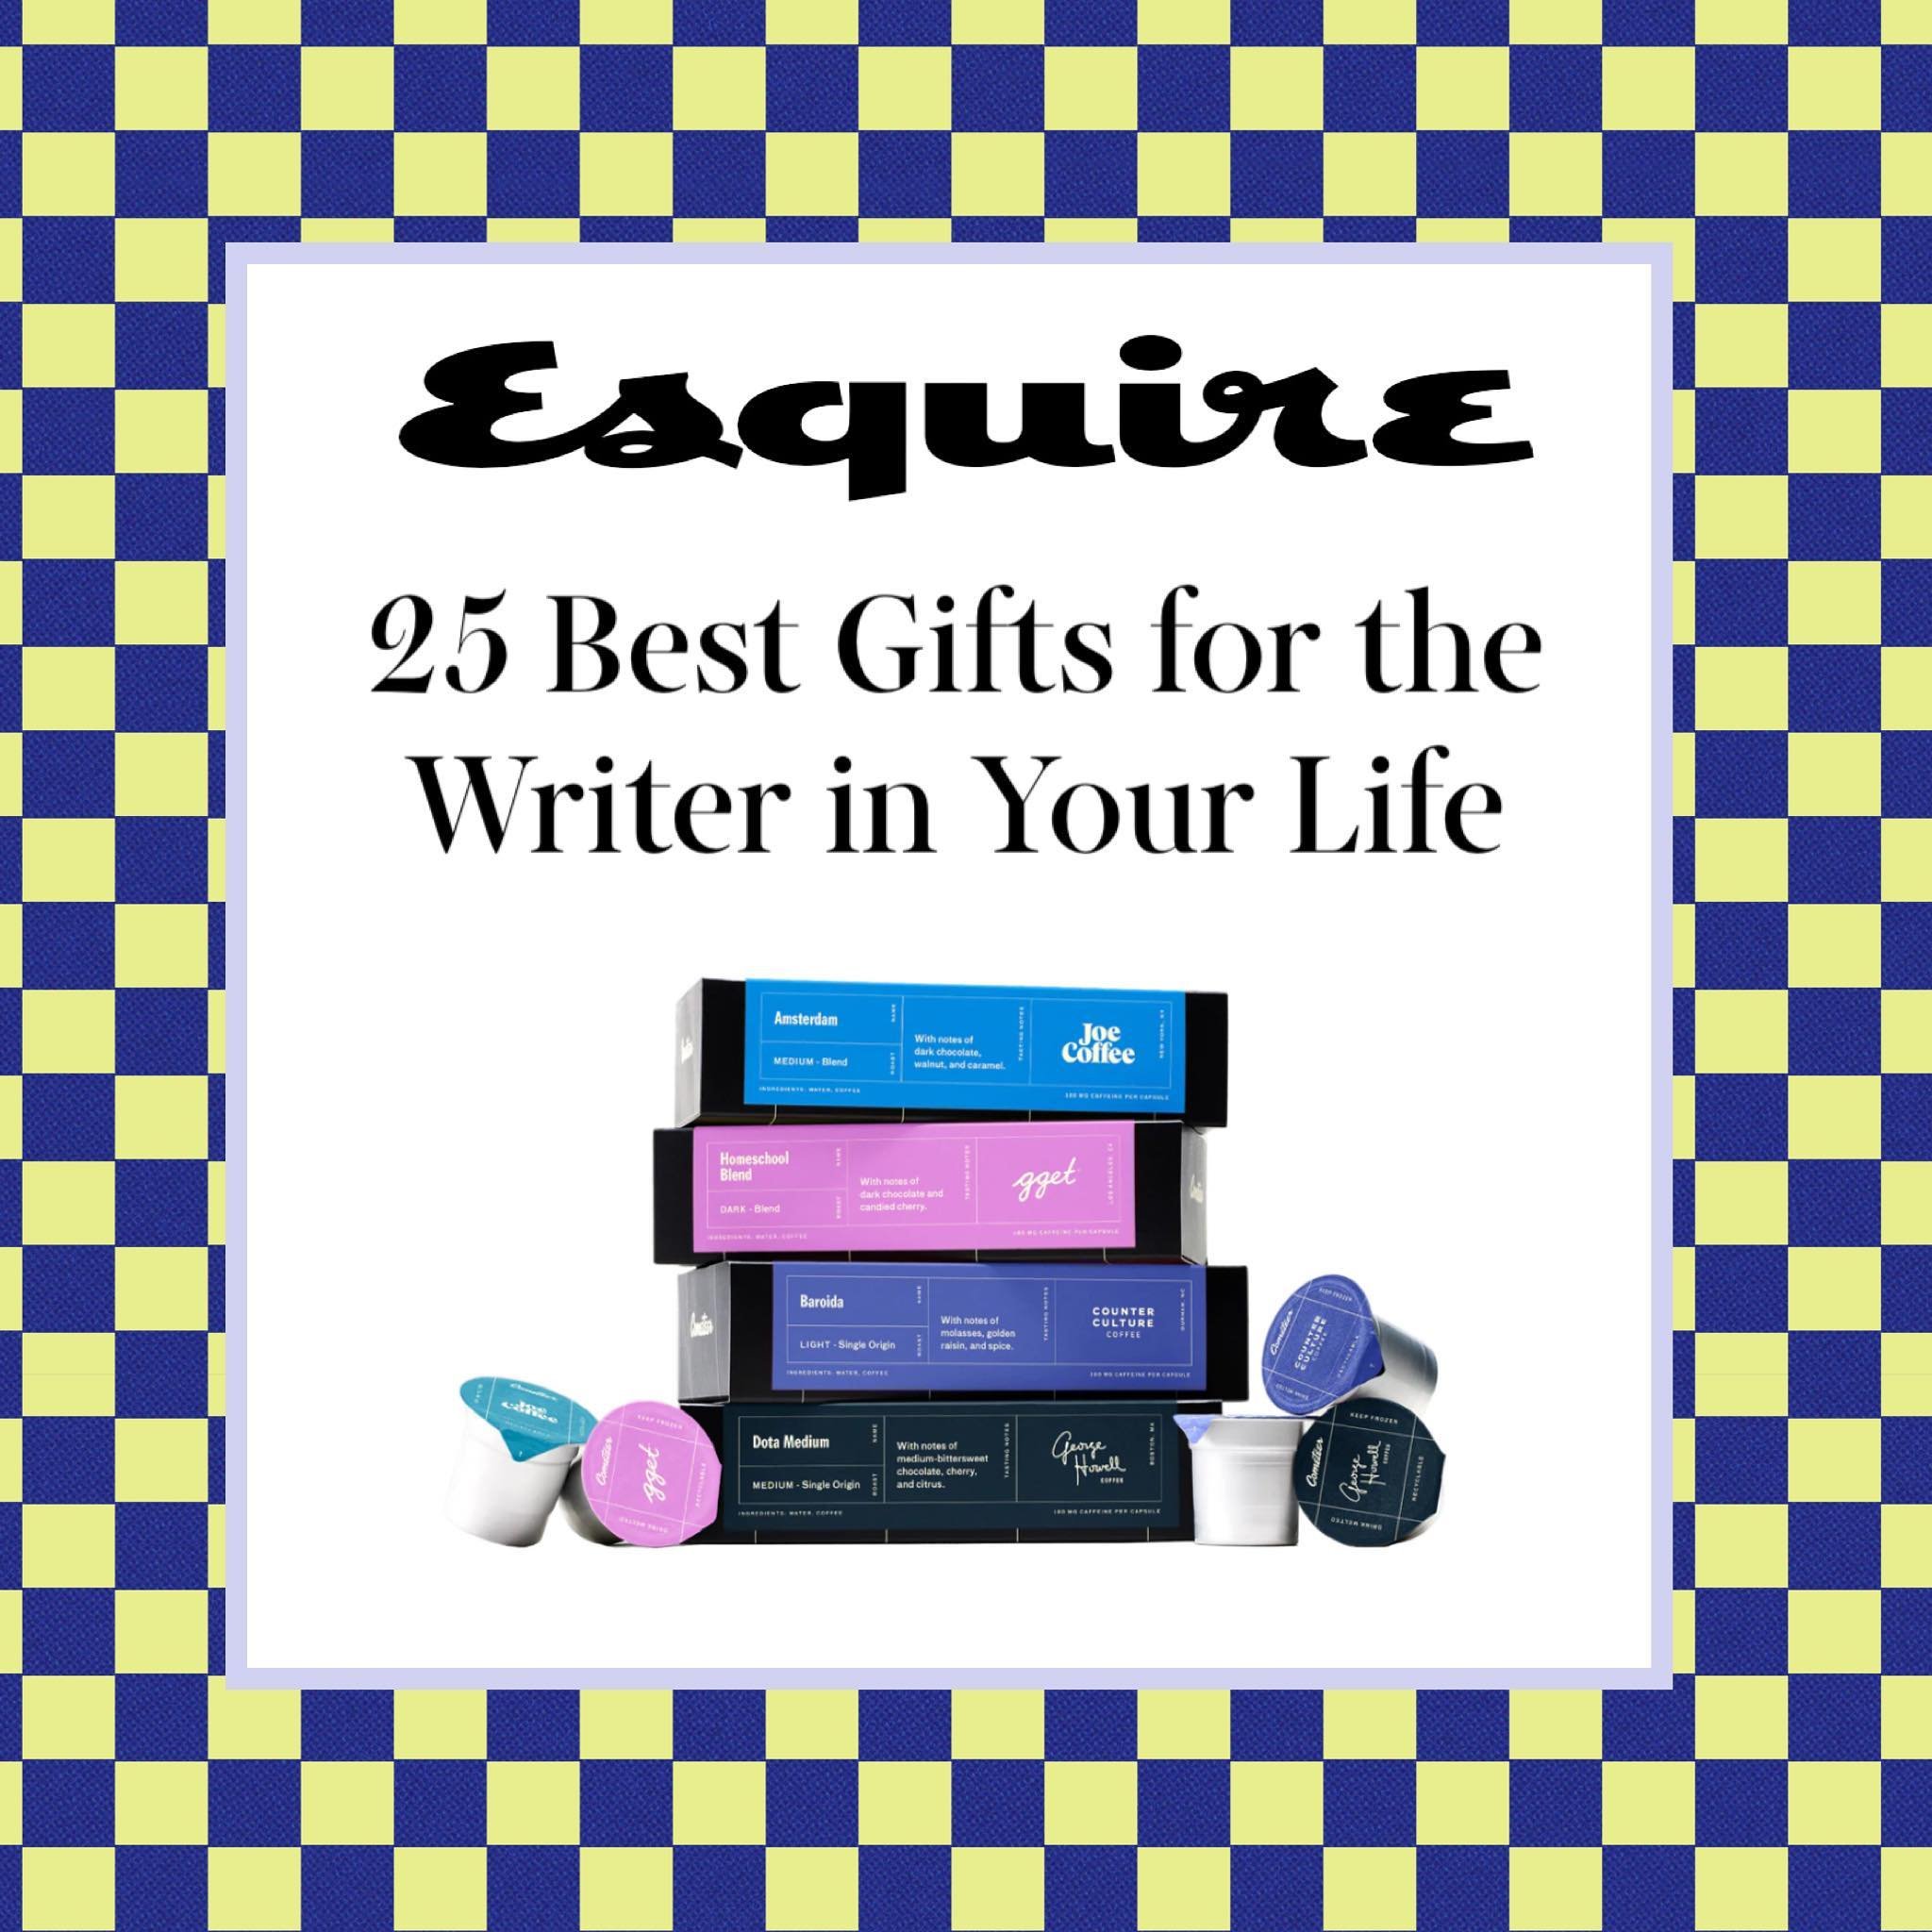 Cometeer in @esquire for Best Gifts for Writers by @tine_vogue